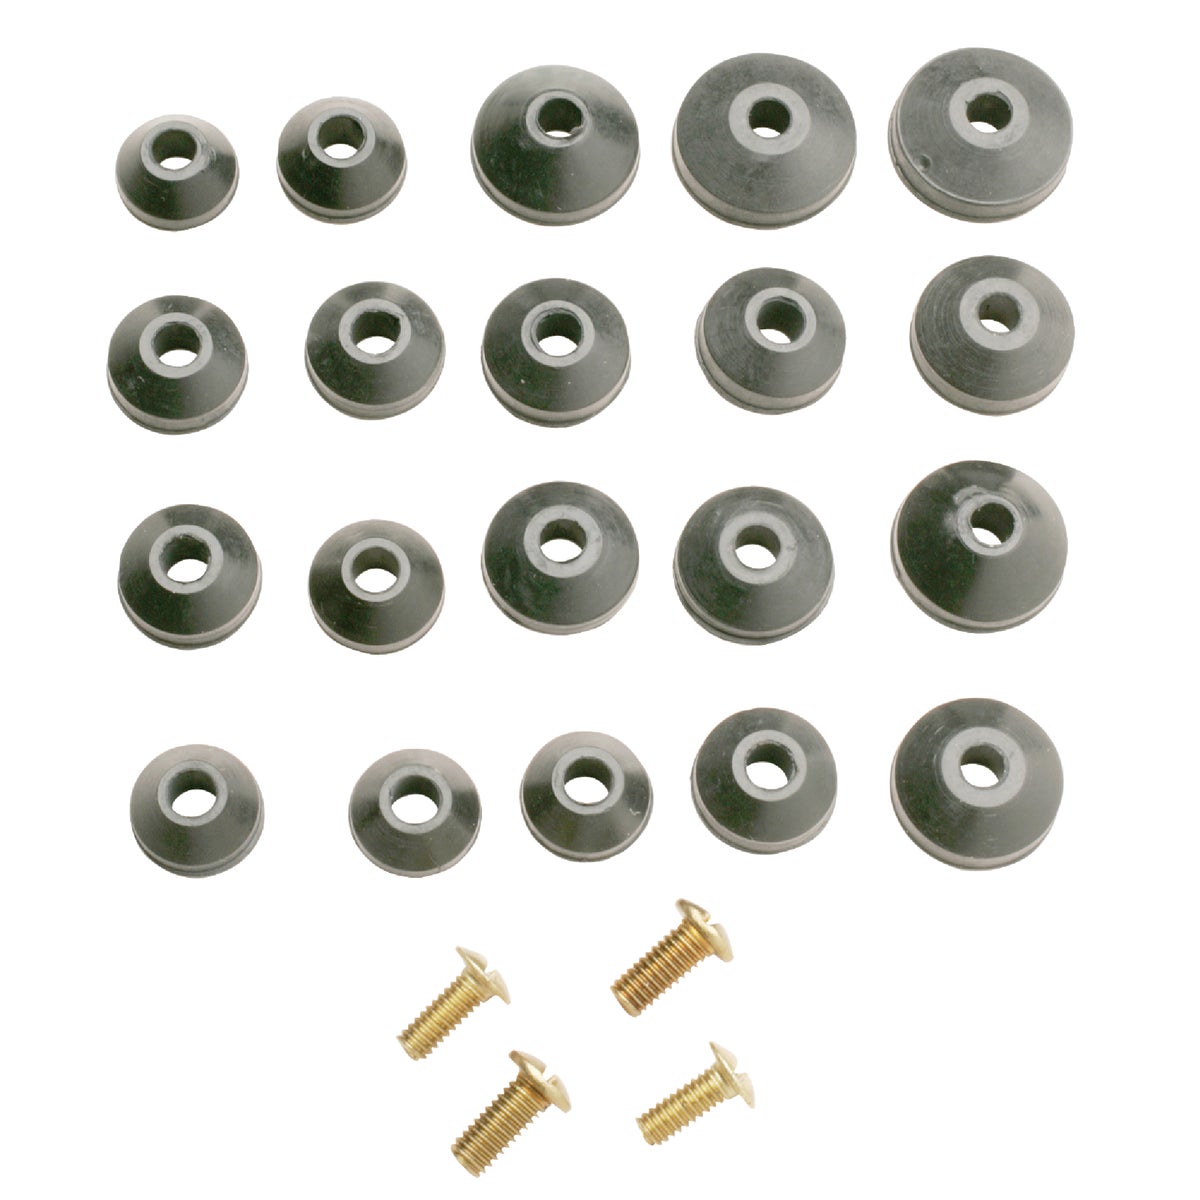 Item 400346, 20 beveled neoprene faucet washers of assorted sizes, and 4 screws.